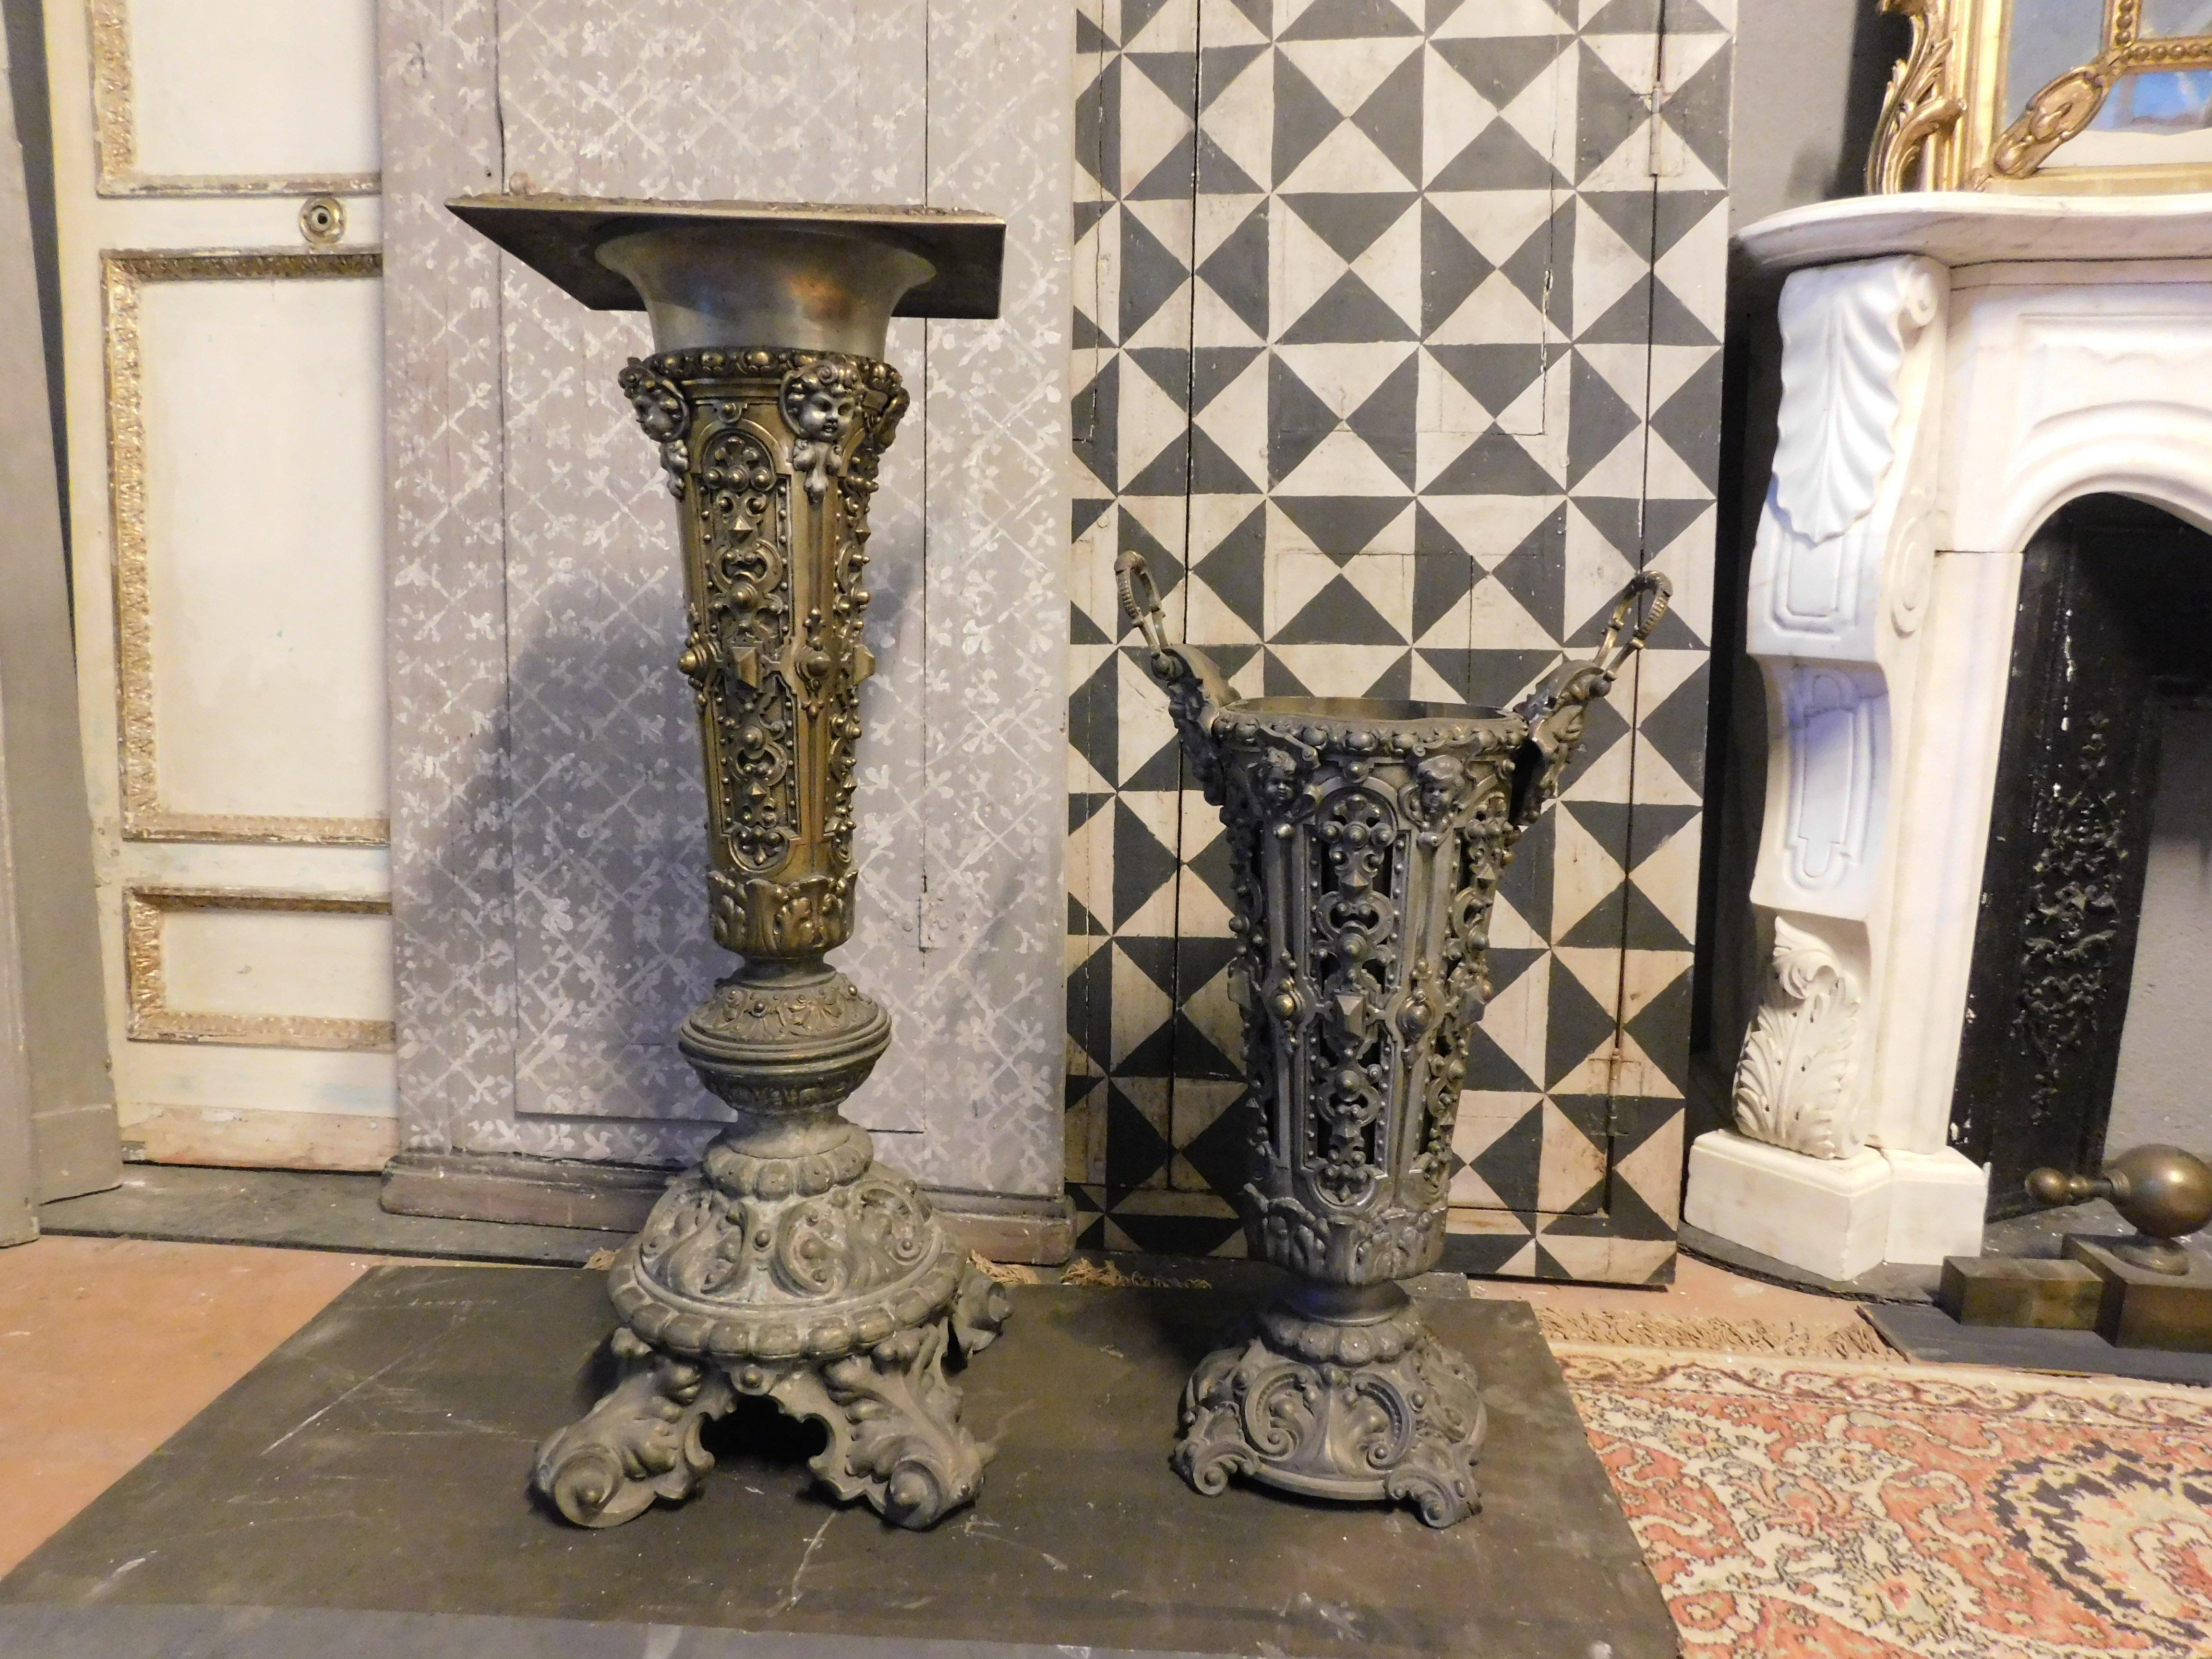 Vintage set of column vase holder and vase umbrella stand, in brass-like metal, richly carved and gilded, built in Italy in the early 1900s.
Usable in different ways, both separated as columns and umbrella stands, and combined as a column and vase